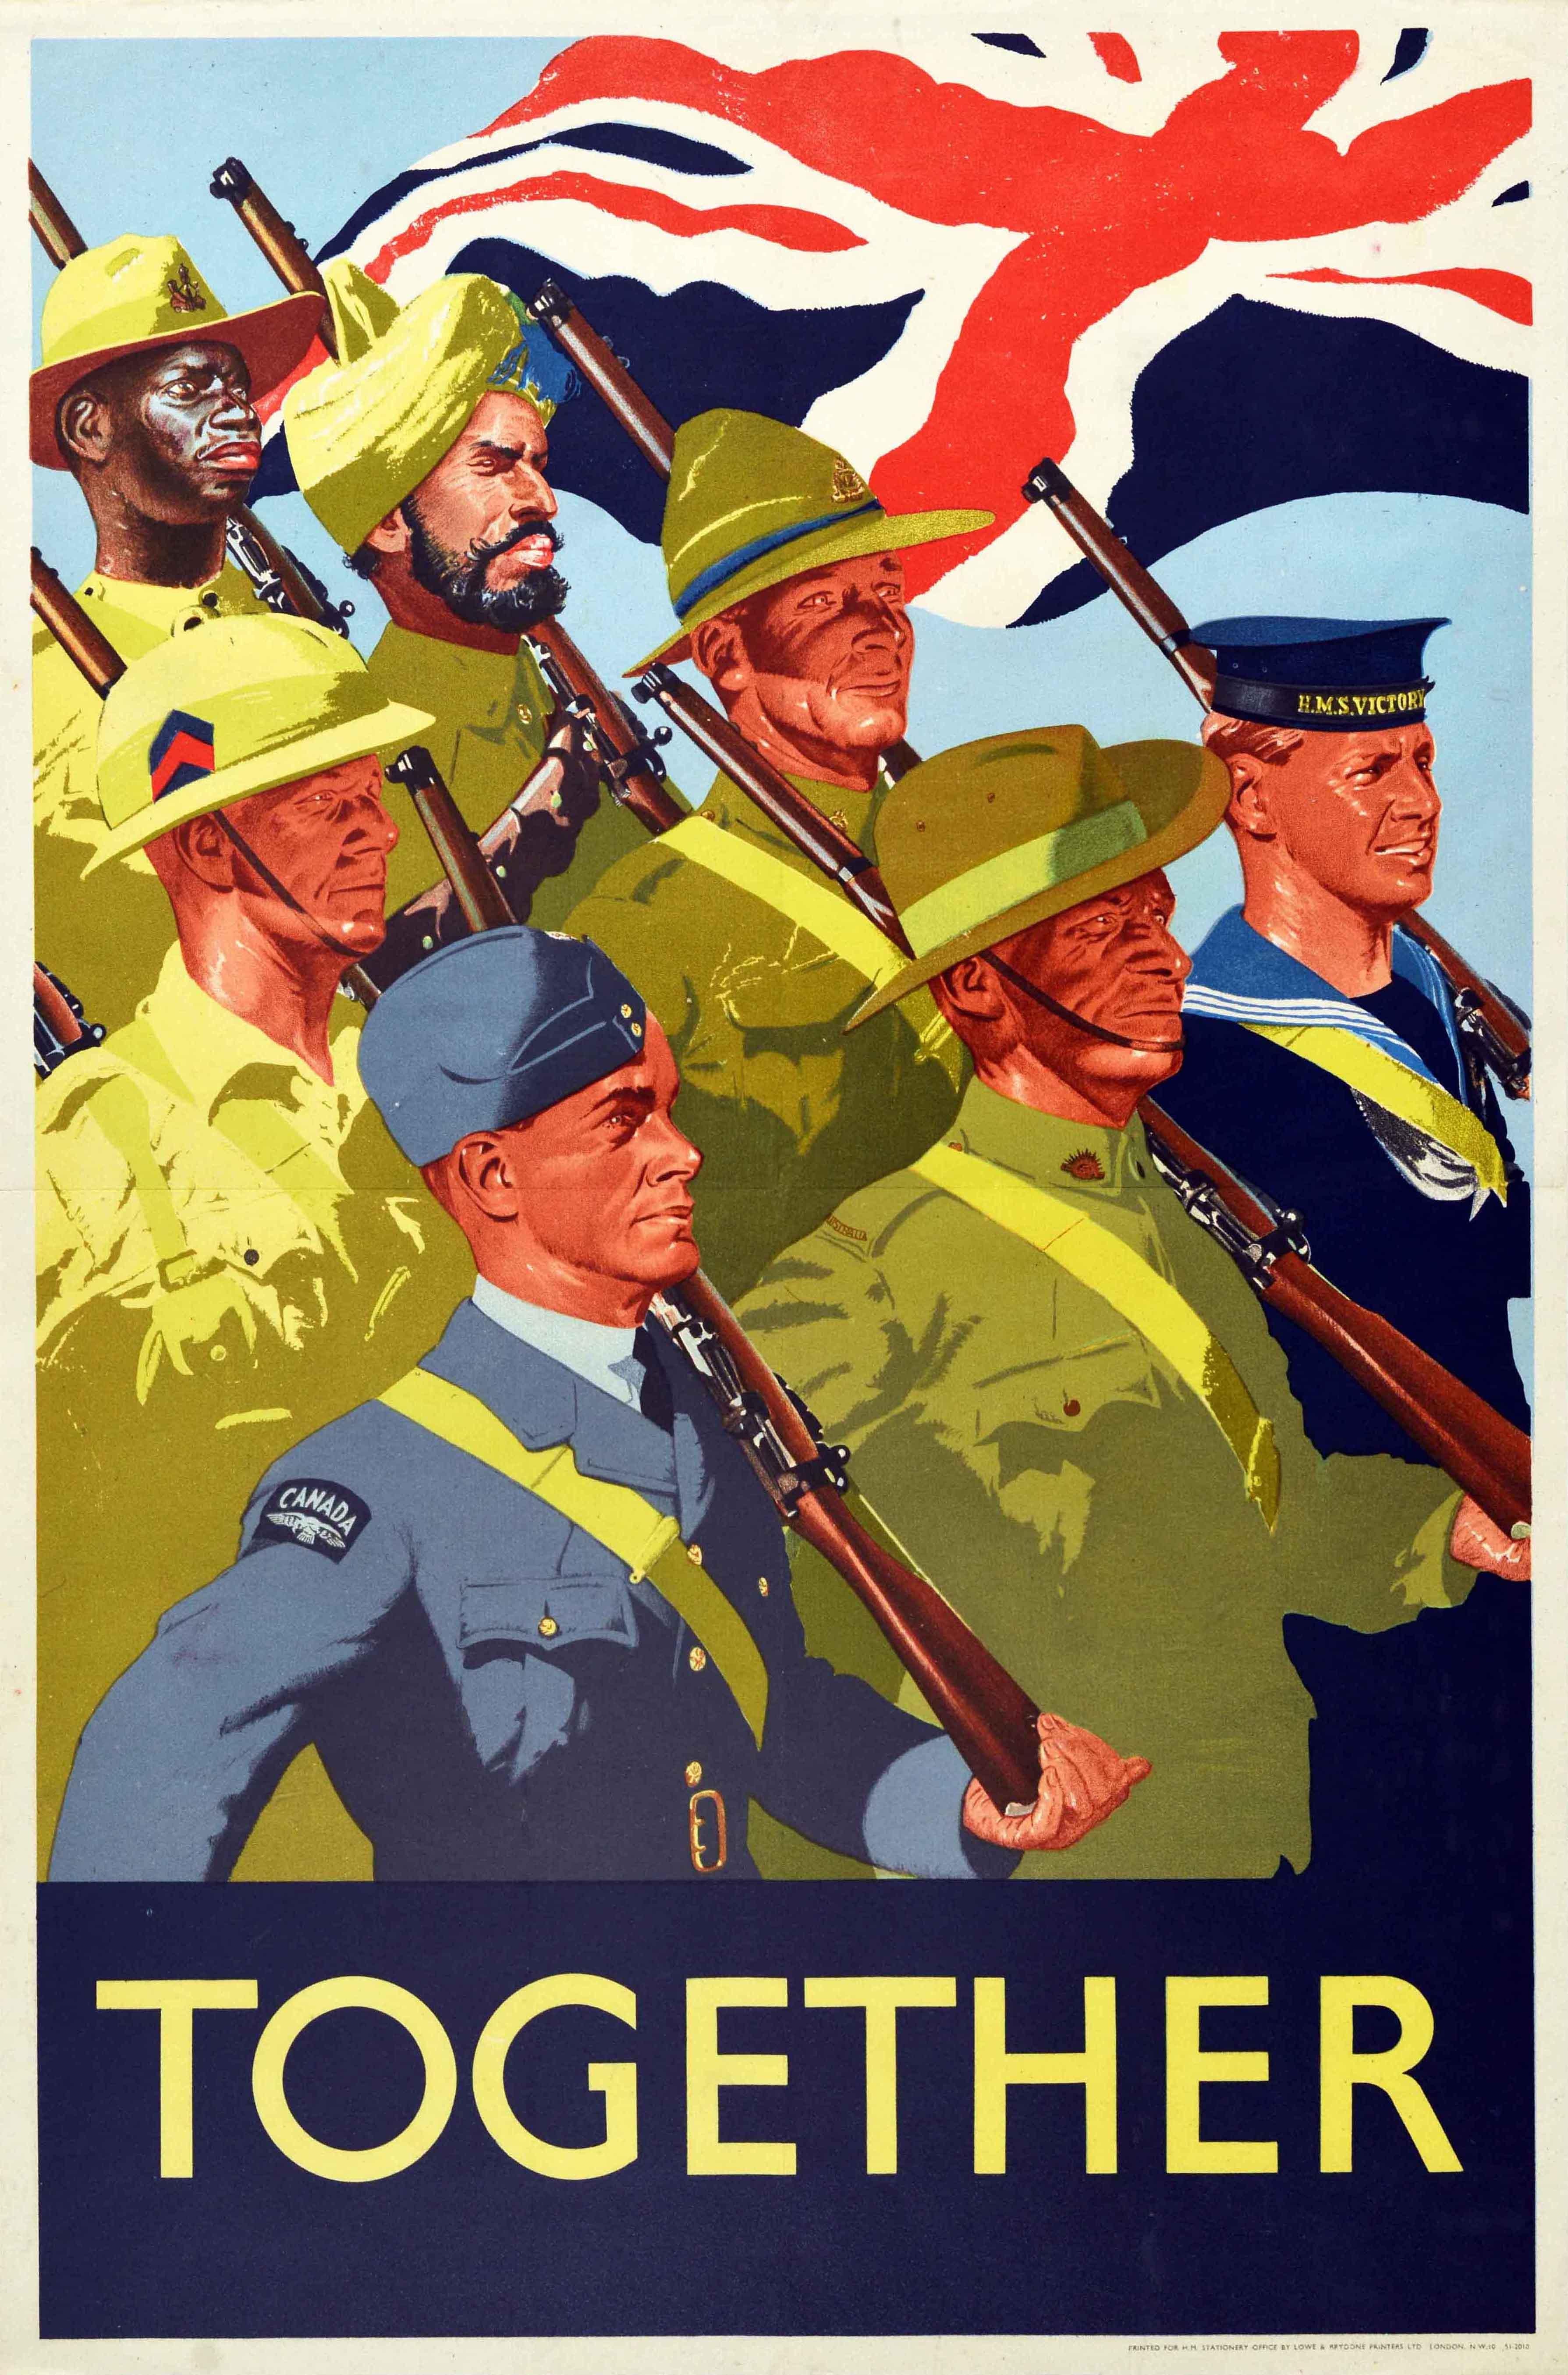 Original vintage World War Two propaganda poster - Together - featuring a dynamic military illustration depicting a group of British Empire Commonwealth soldiers in uniform marching together with rifle guns over their shoulders under a Union Jack